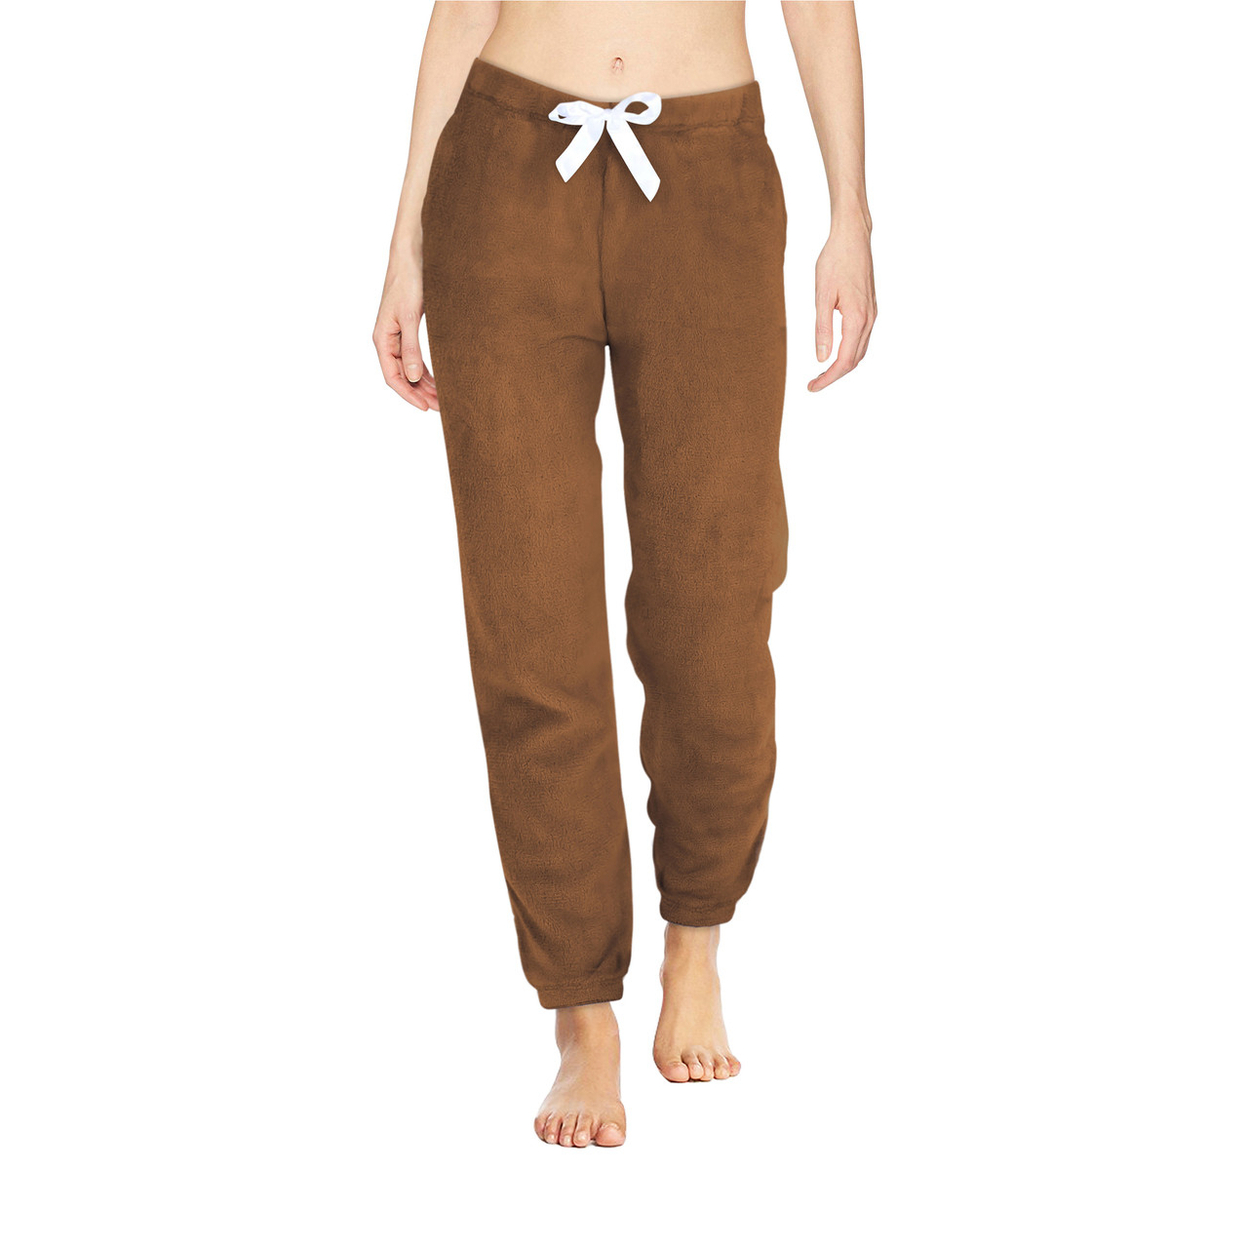 4-Pack: Women's Solid Ultra-Soft Comfy Stretch Micro-Fleece Pajama Lounge Pants - Small